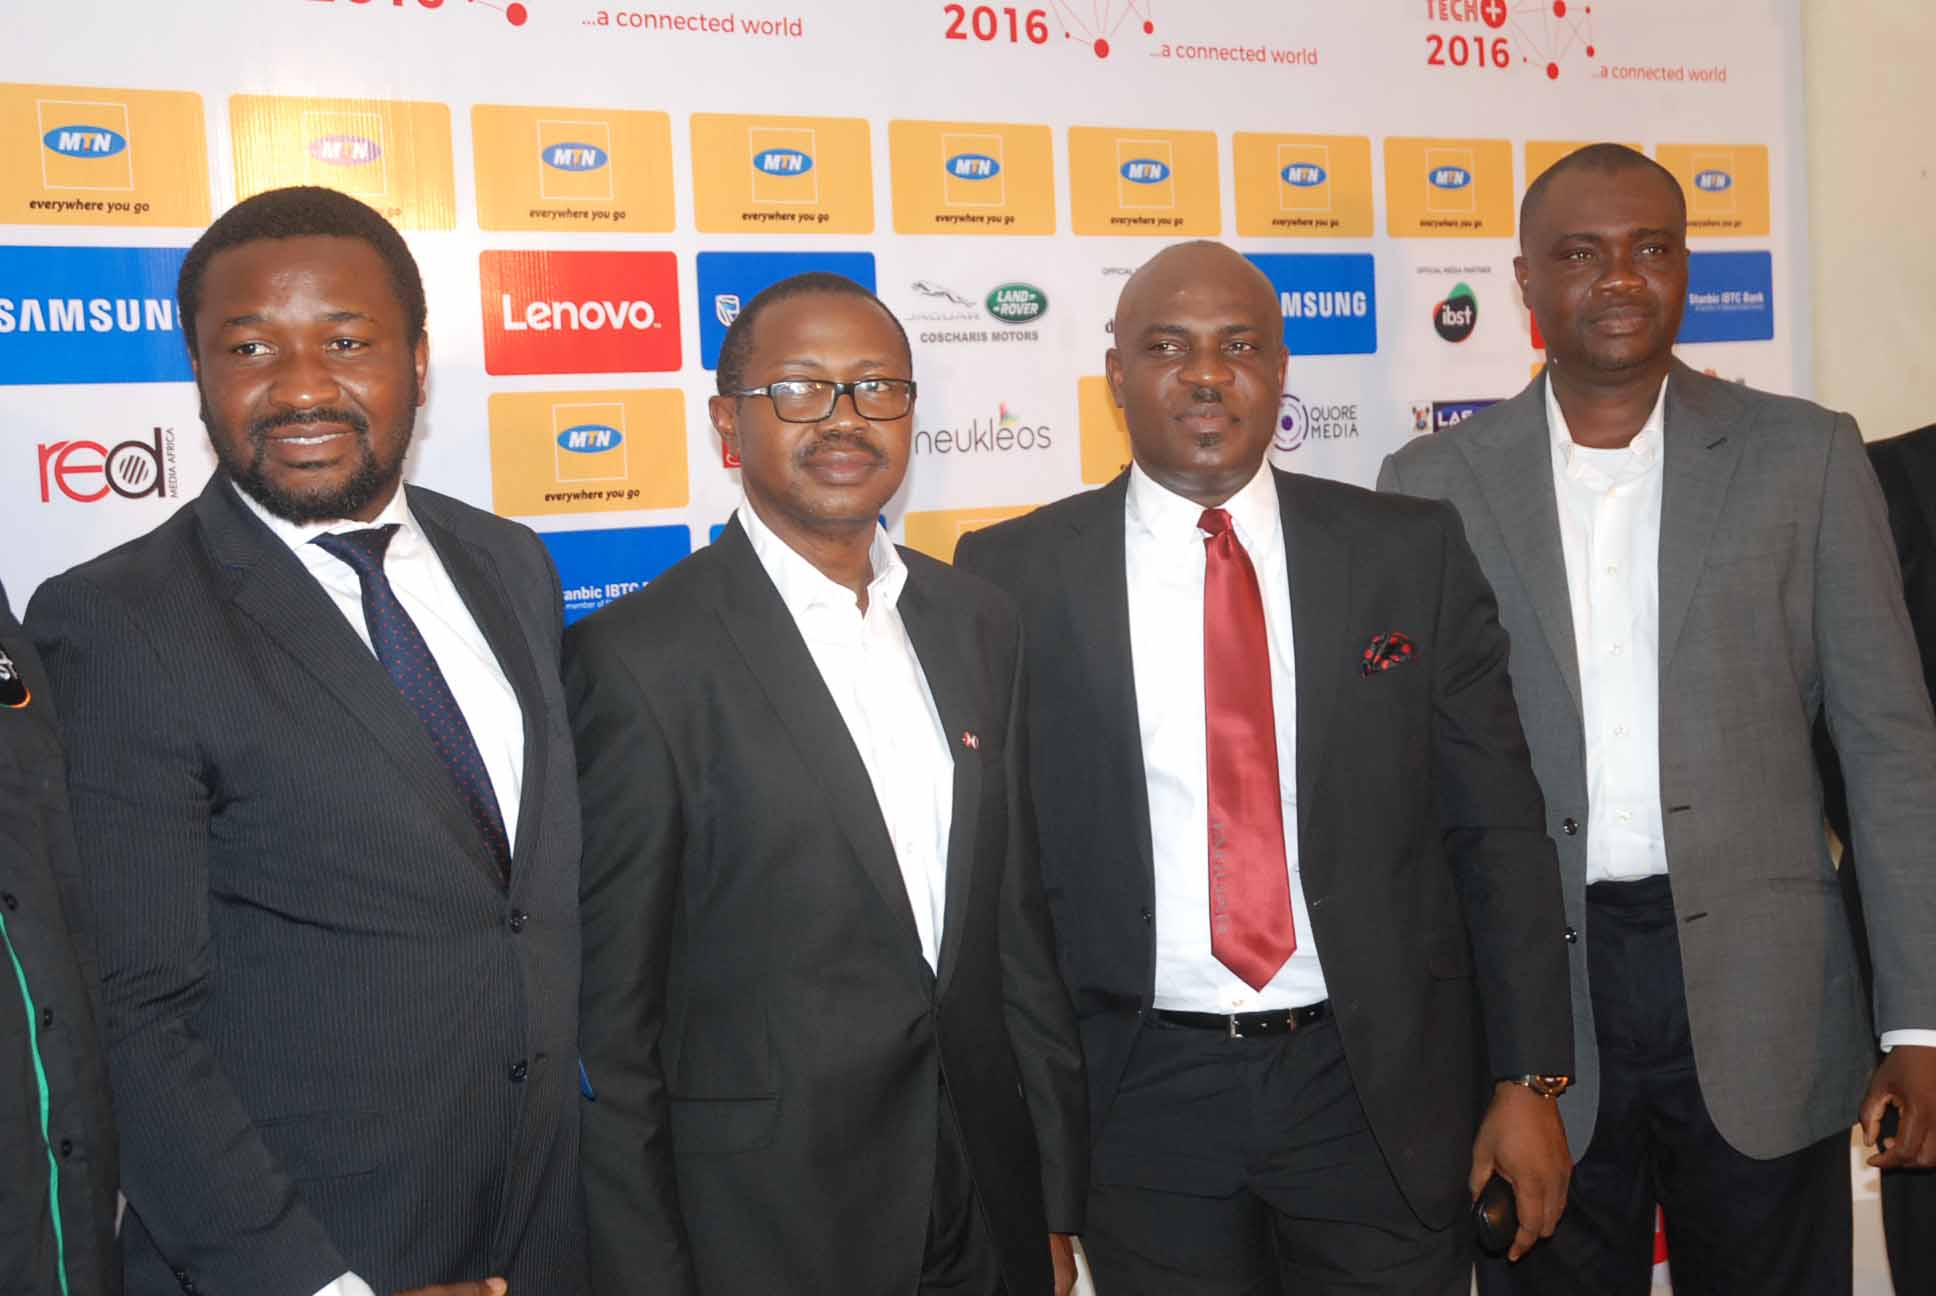 L-R: Programme Director, Techplus 2016, Gbonju Akingbade(left); Managing Director, Connect Marketing, Tunji Adeyinka; General Manager, Marketing, Coscharis, Abiona Babatunde; and General Manager, Consumer Marketing, MTN, Nigeria, Richard  Iweanoge at the Techplus exhibition  2016 press conference in Lagos.